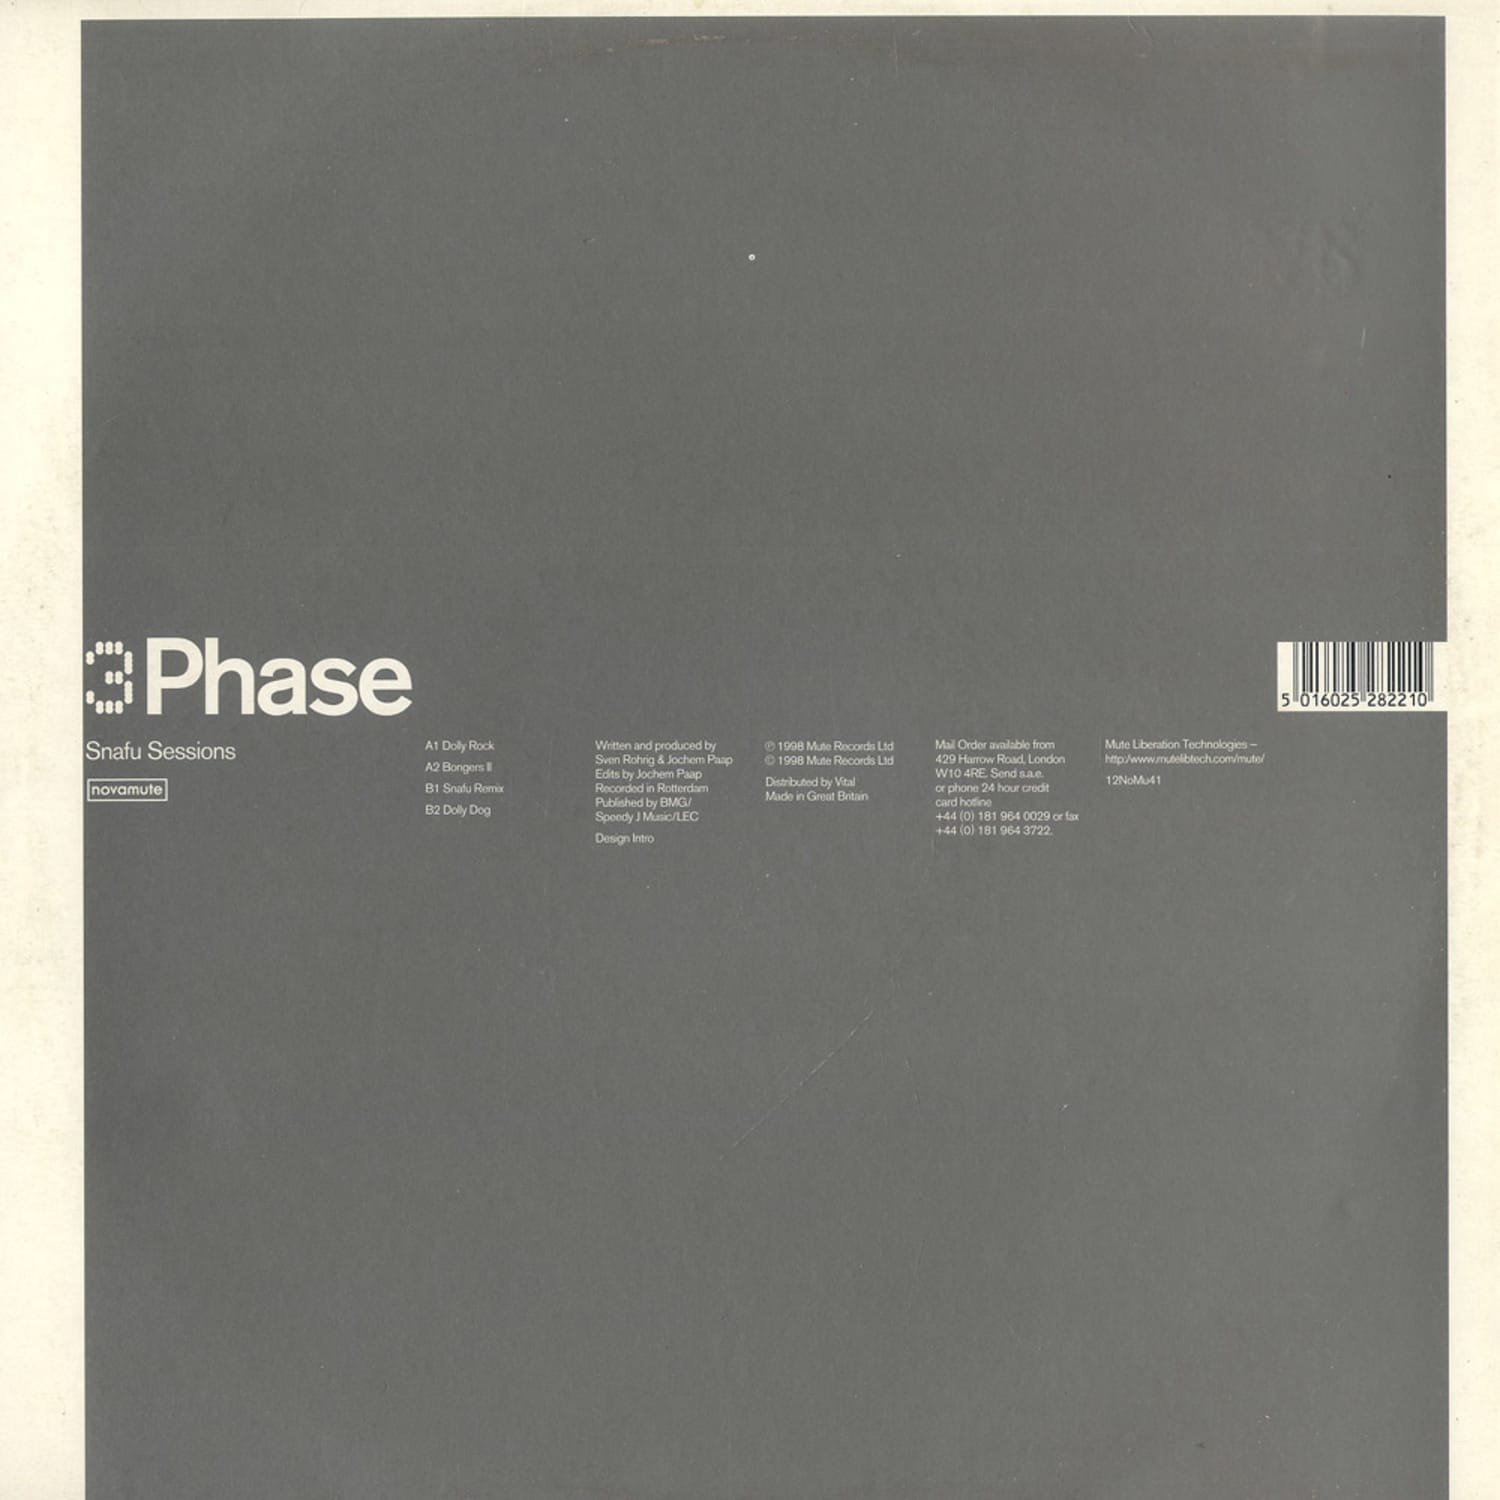 3 Phase - SNAFU SESSIONS